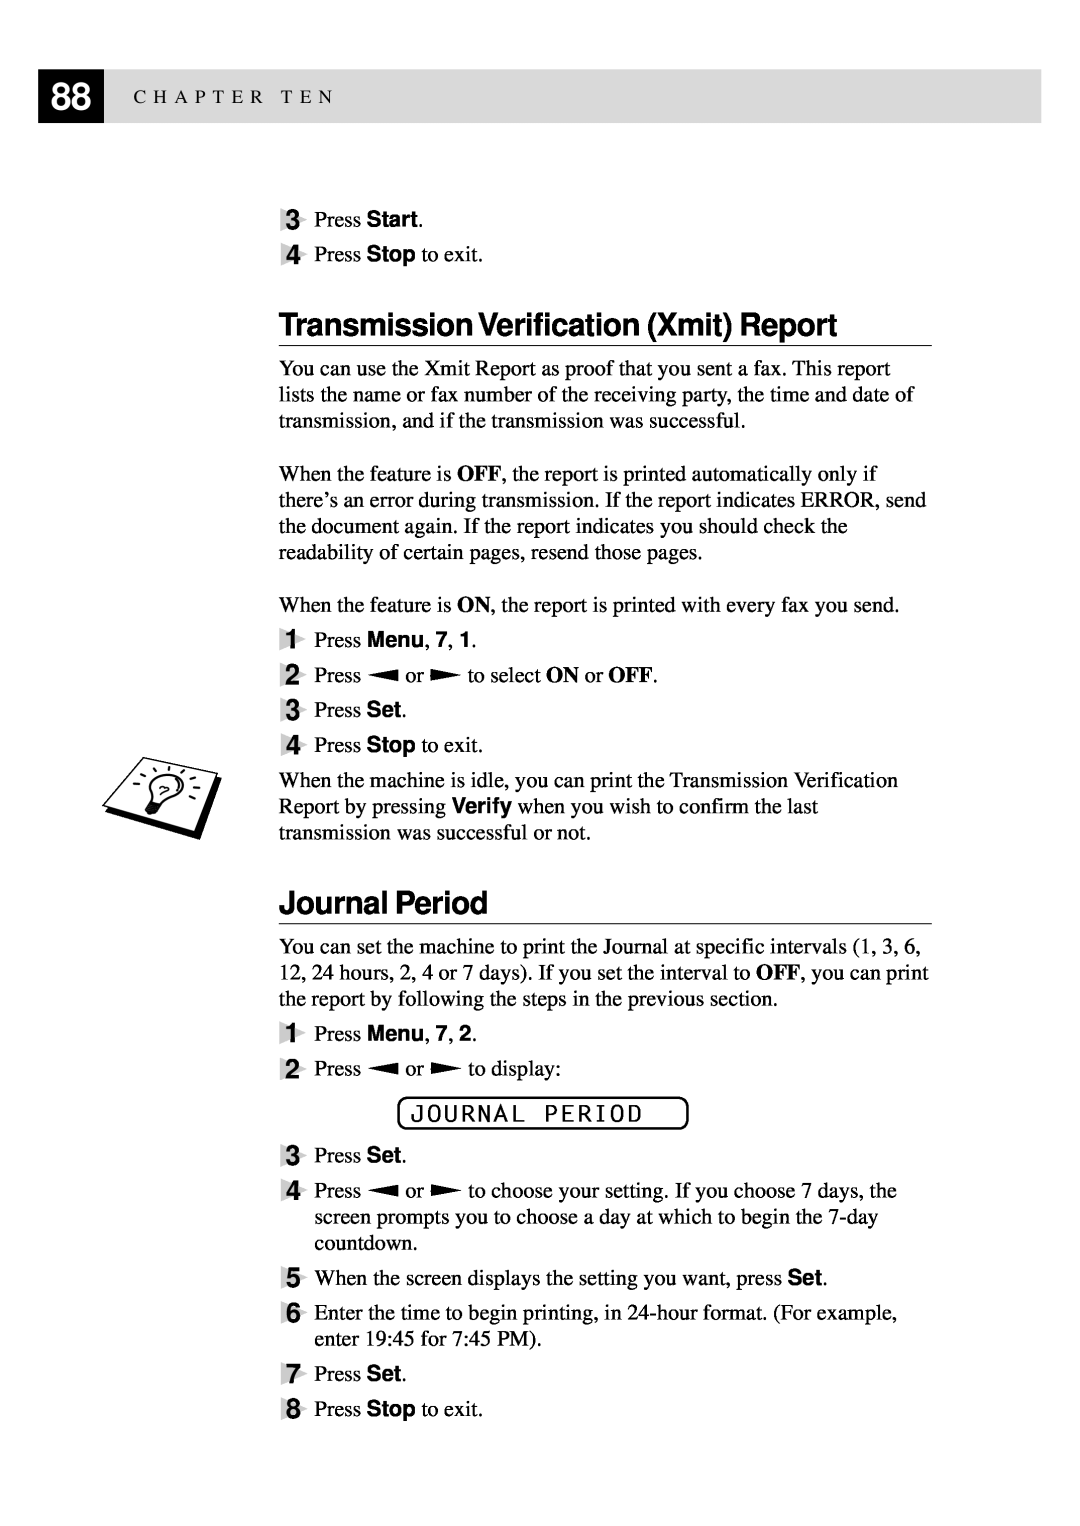 Brother 515 manual Transmission Verification Xmit Report, Journal Period 